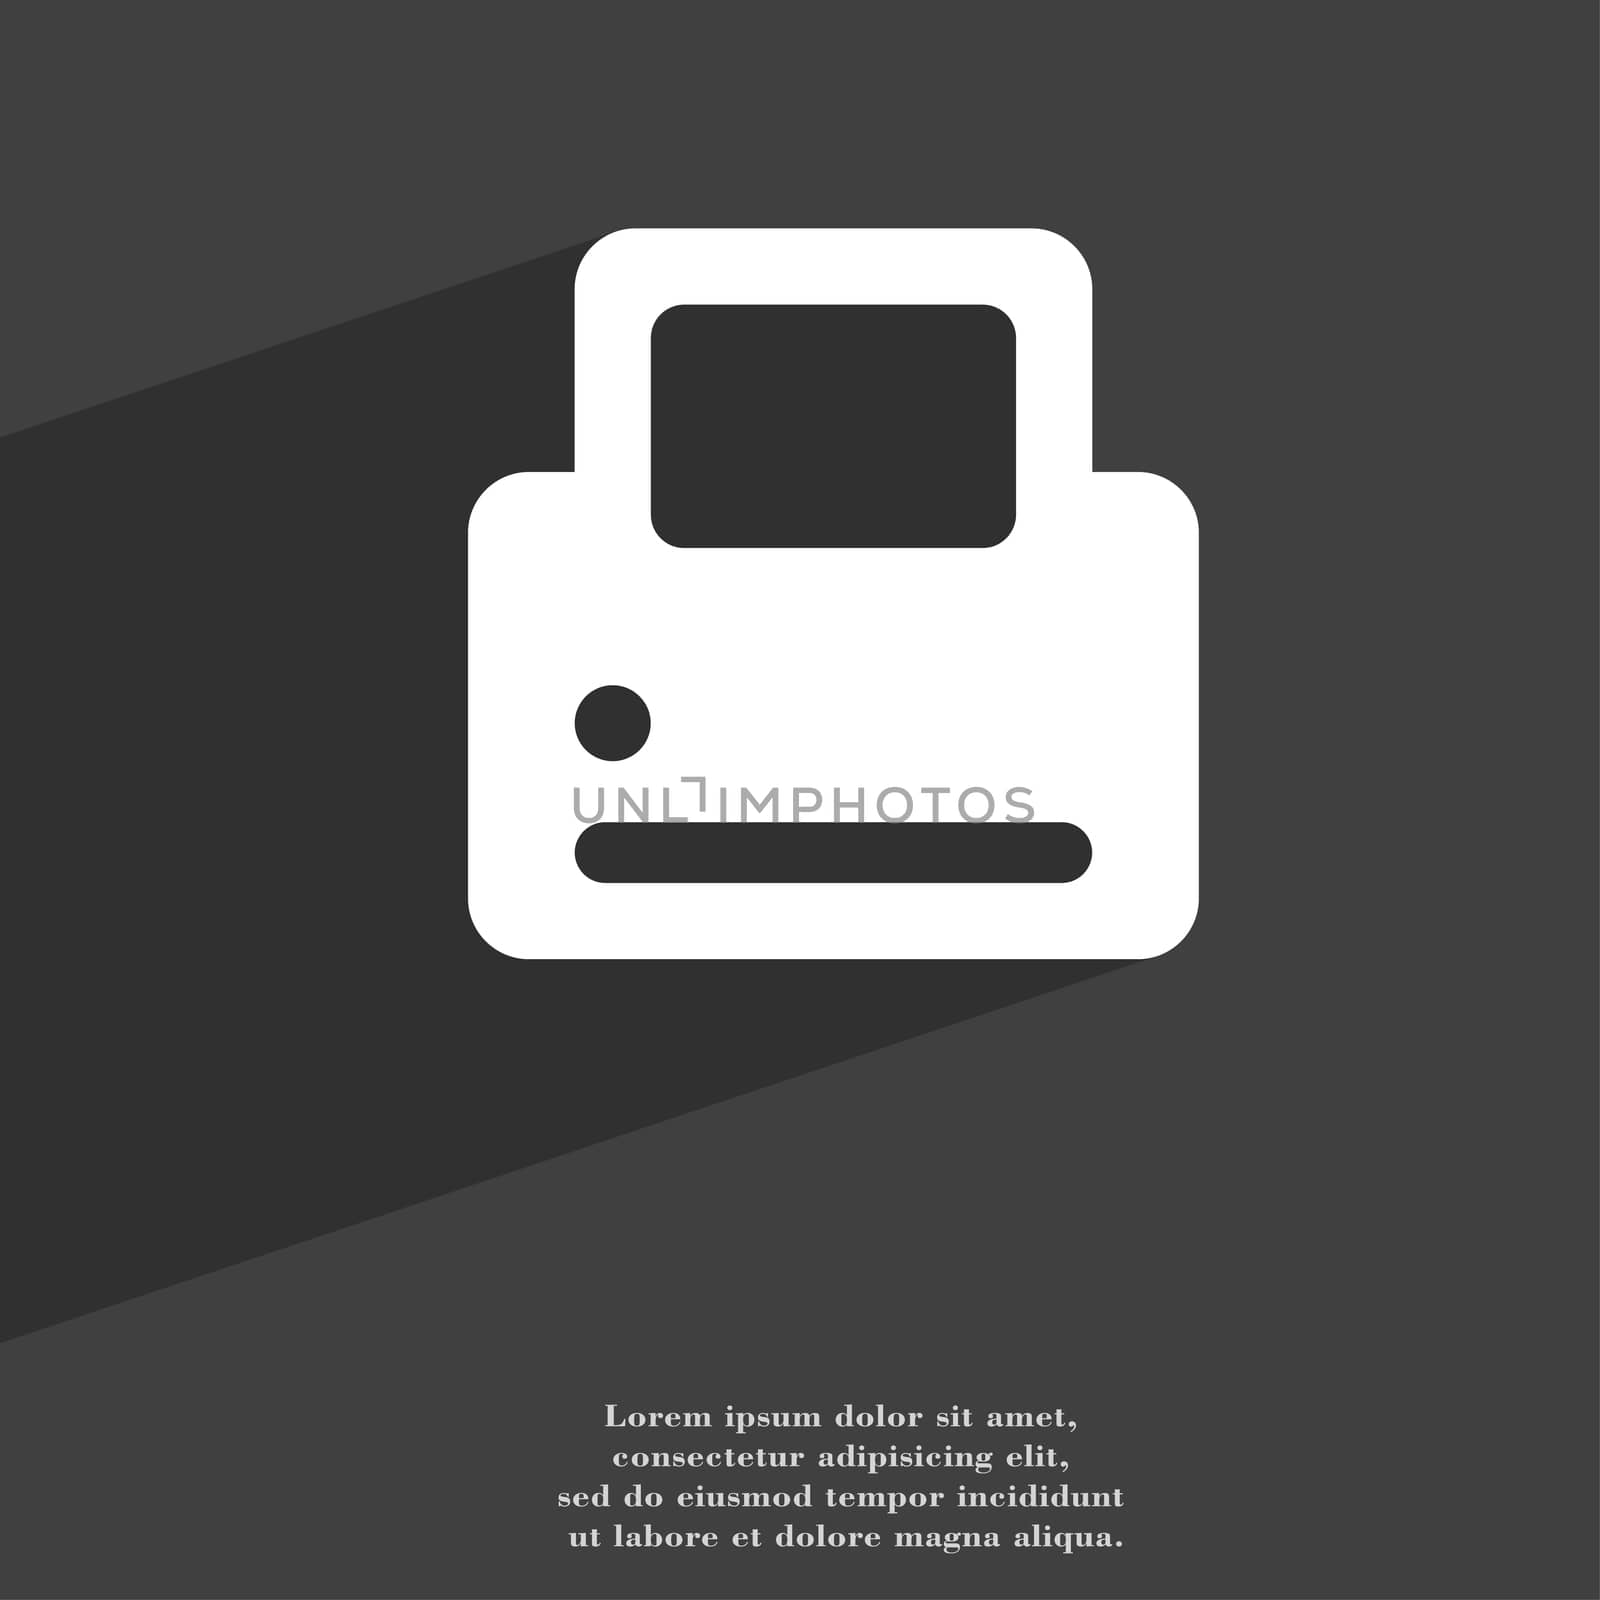 Printing icon symbol Flat modern web design with long shadow and space for your text. illustration